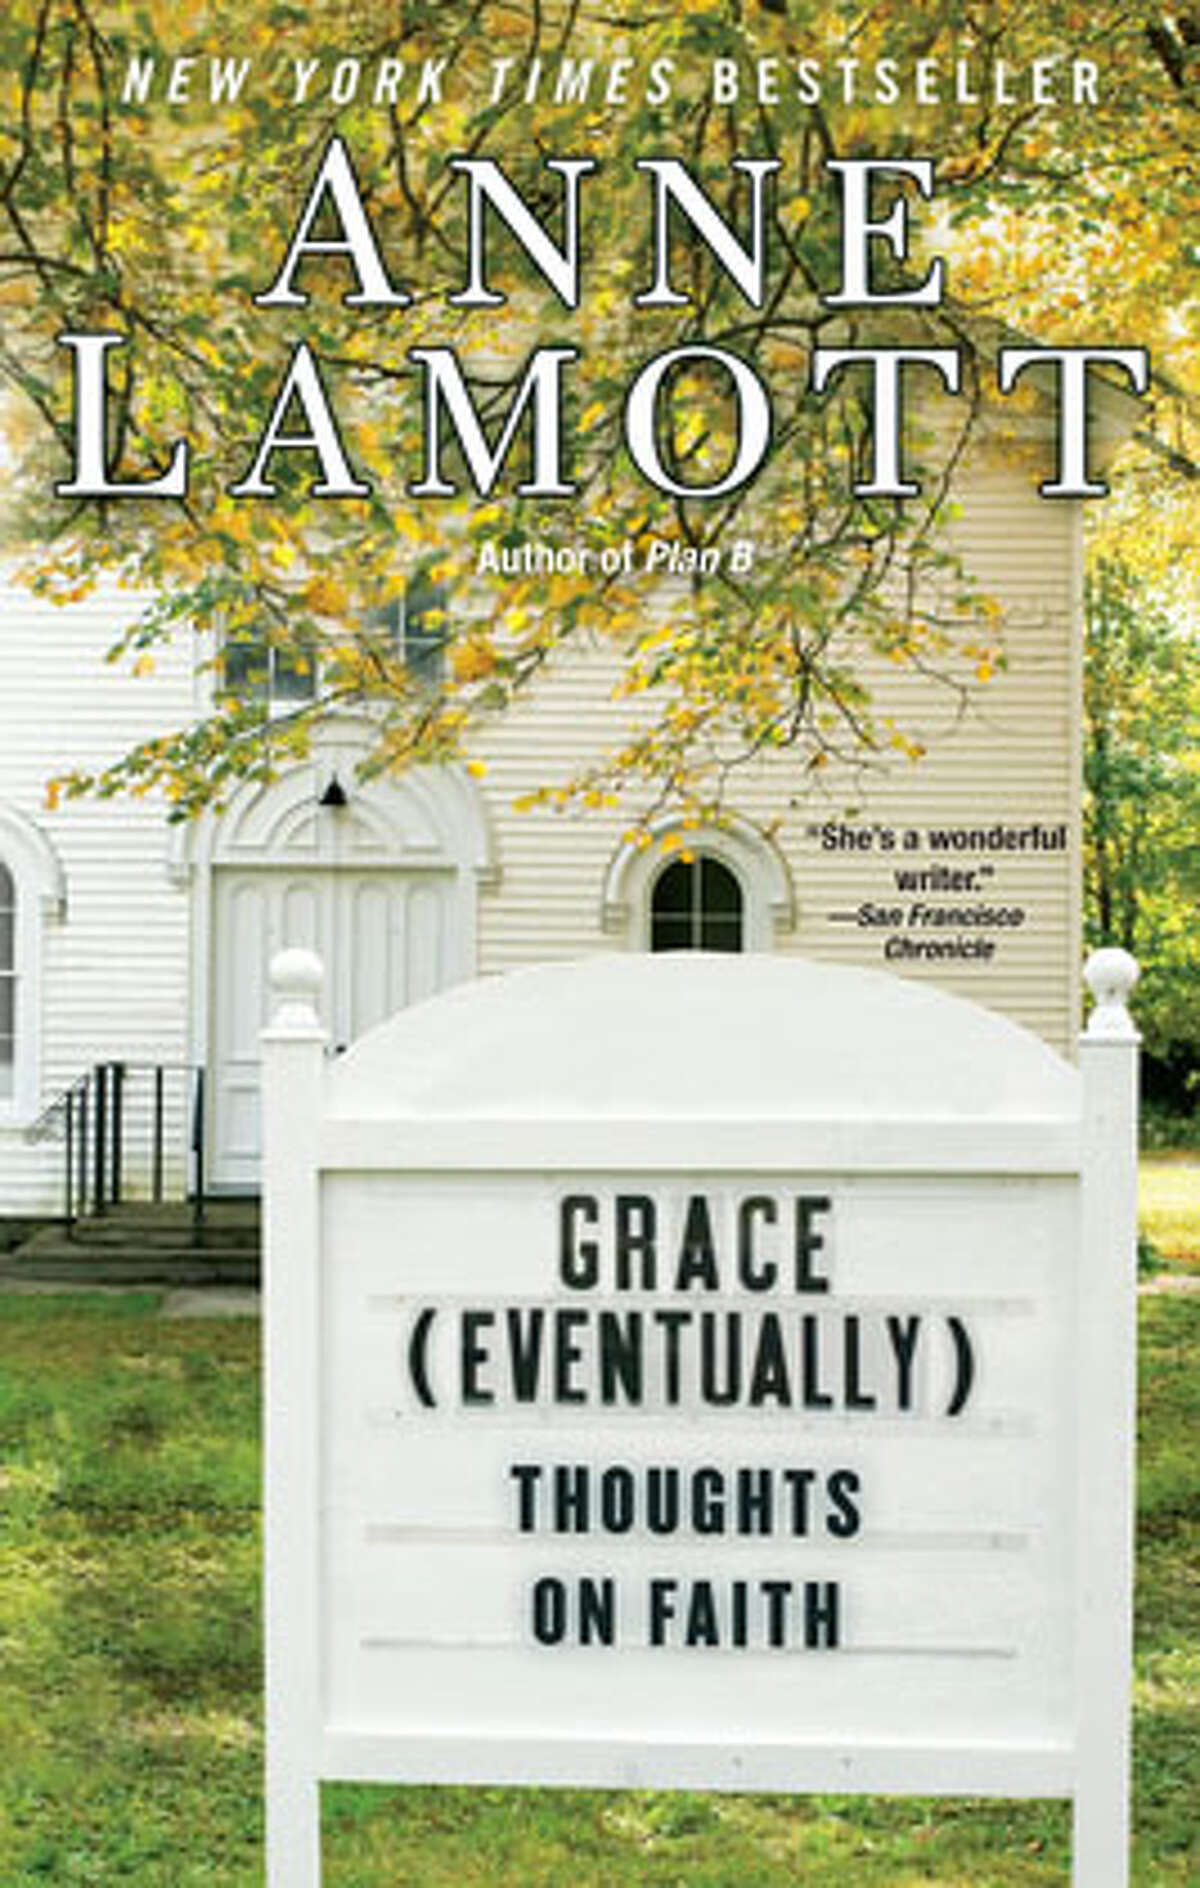 "Grace (Eventually): Thoughts on Faith" by Anne Lamott.